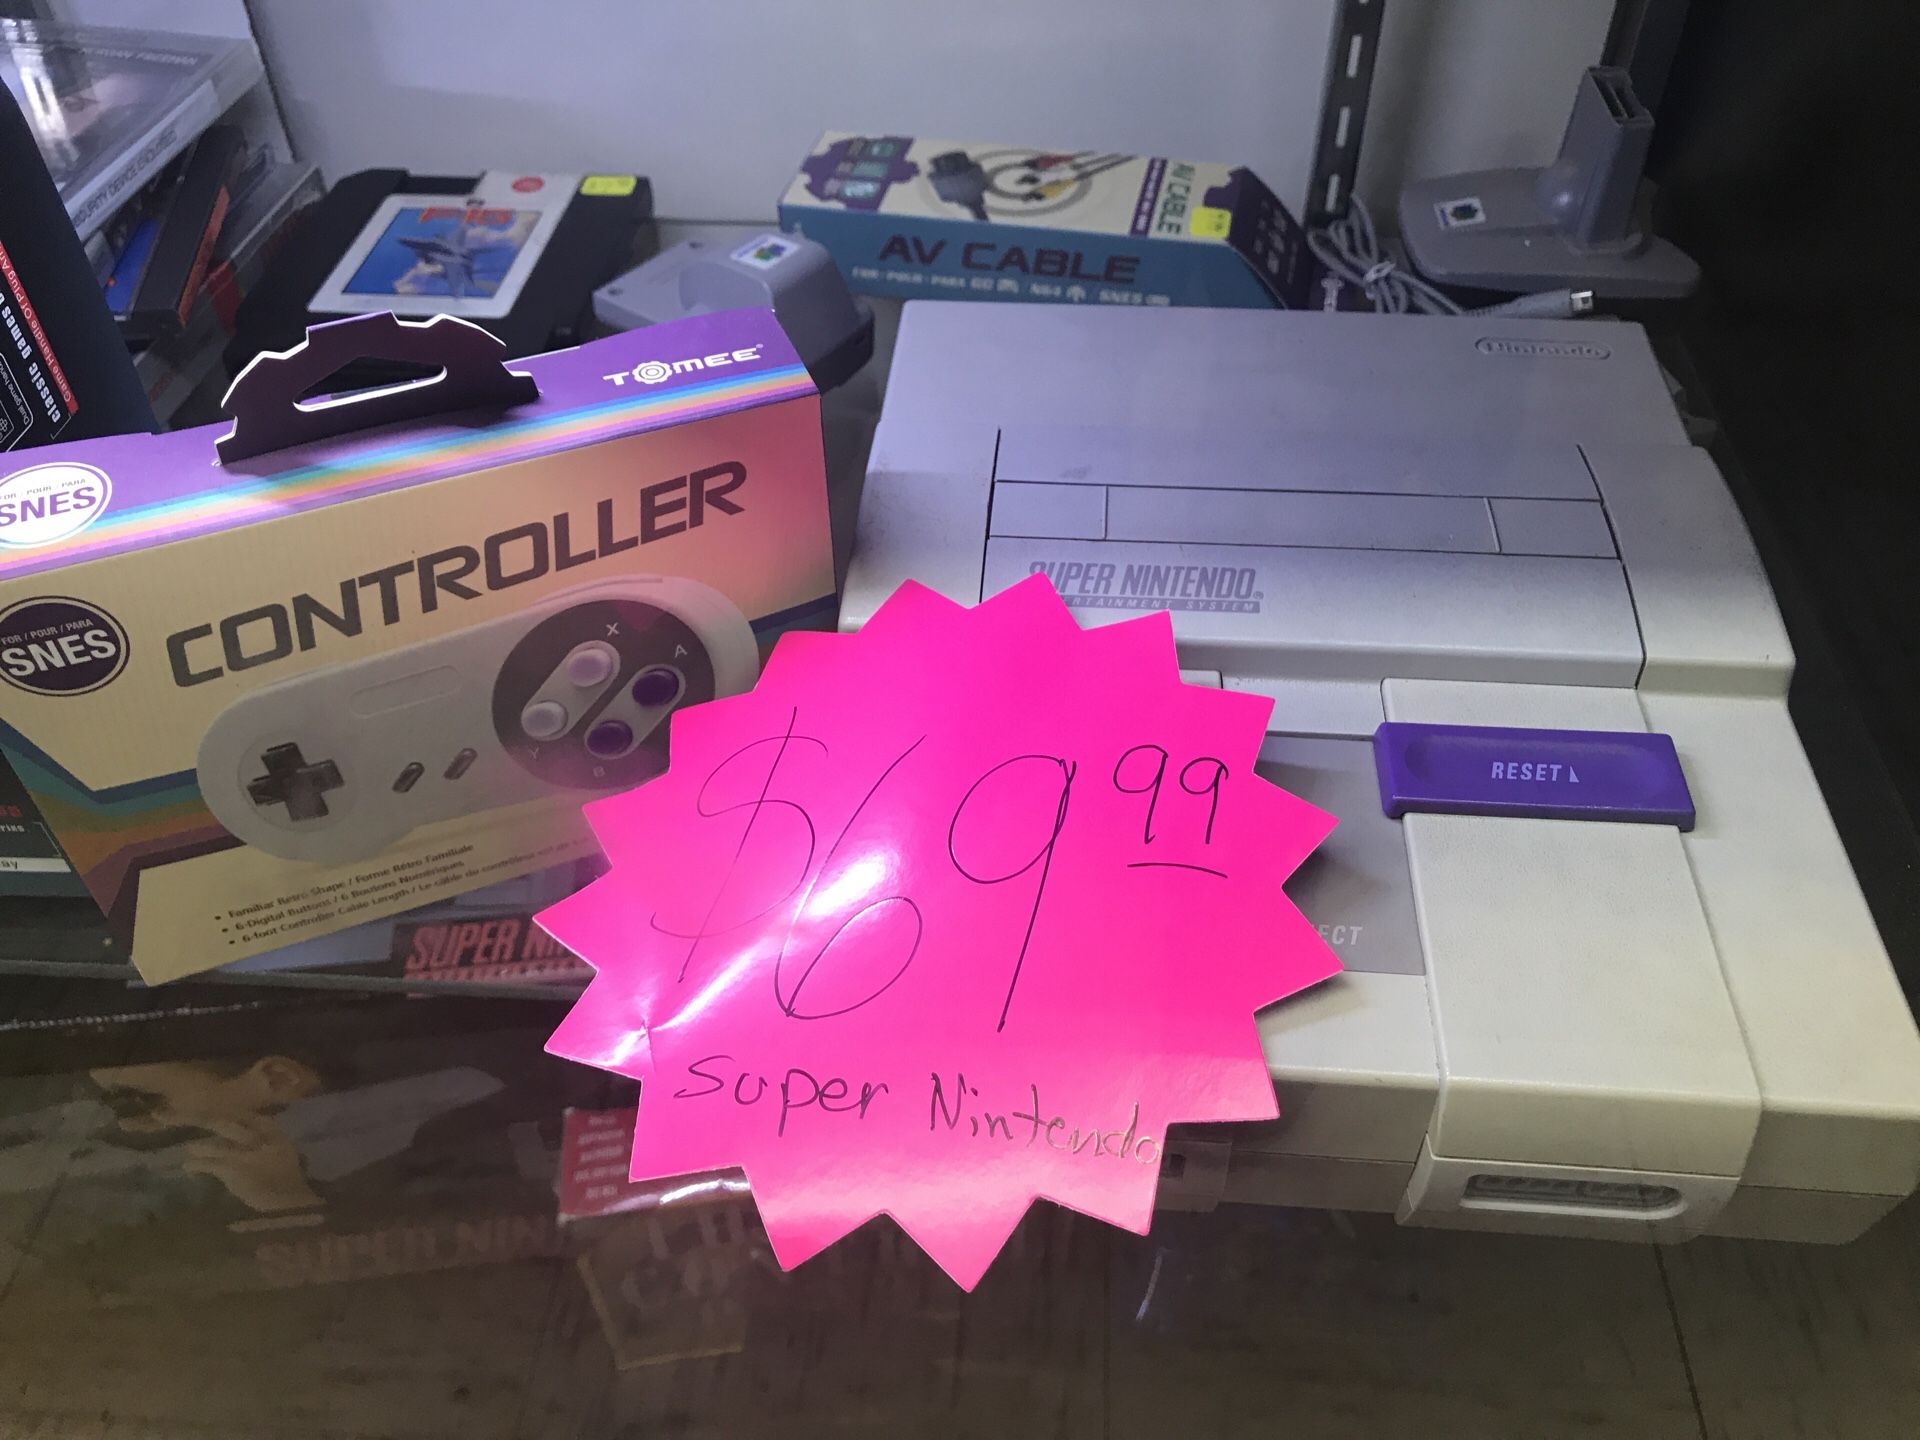 Super Nintendo system with cables and controller